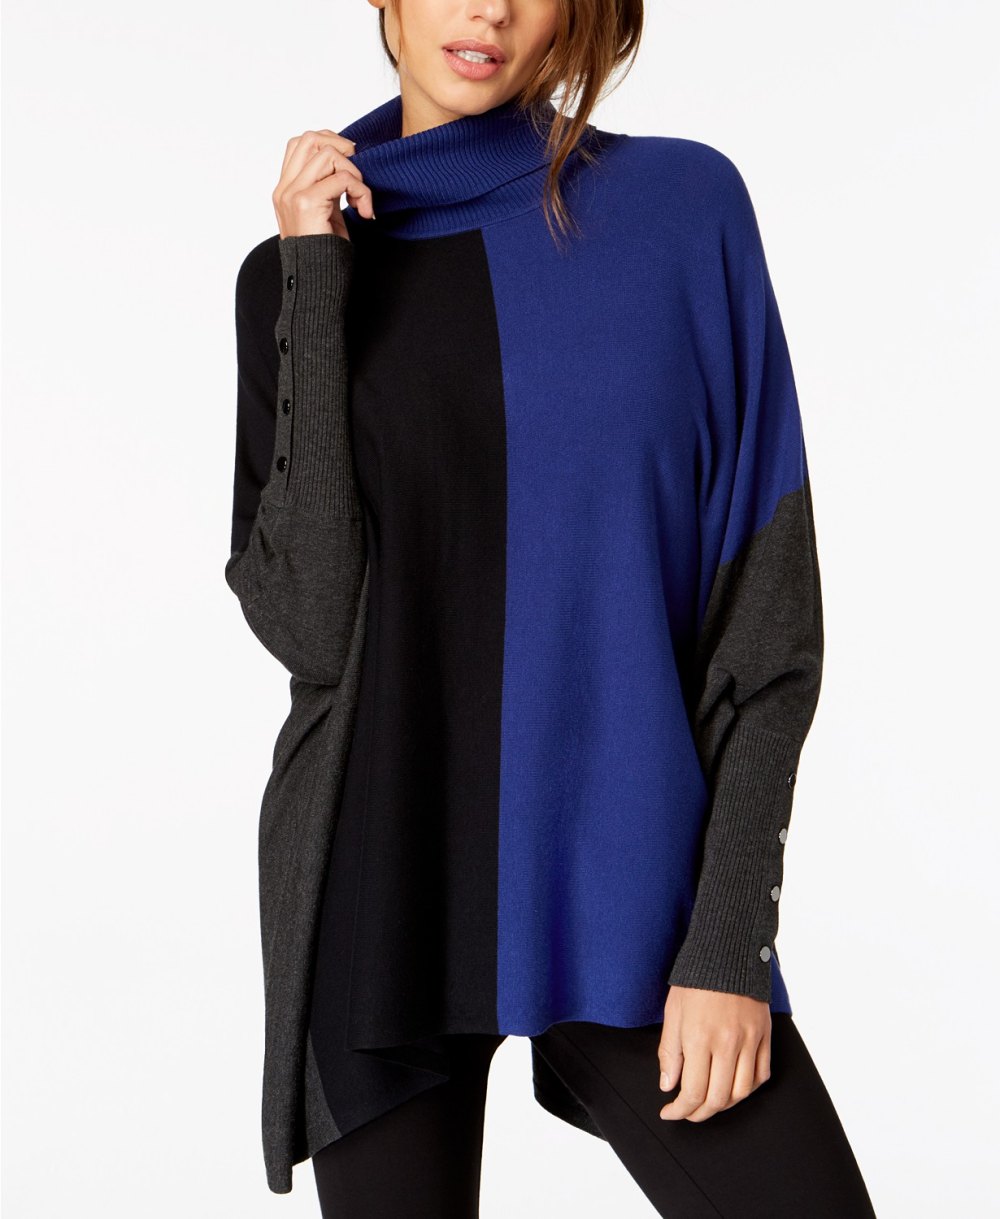 black gray and blue poncho sweater